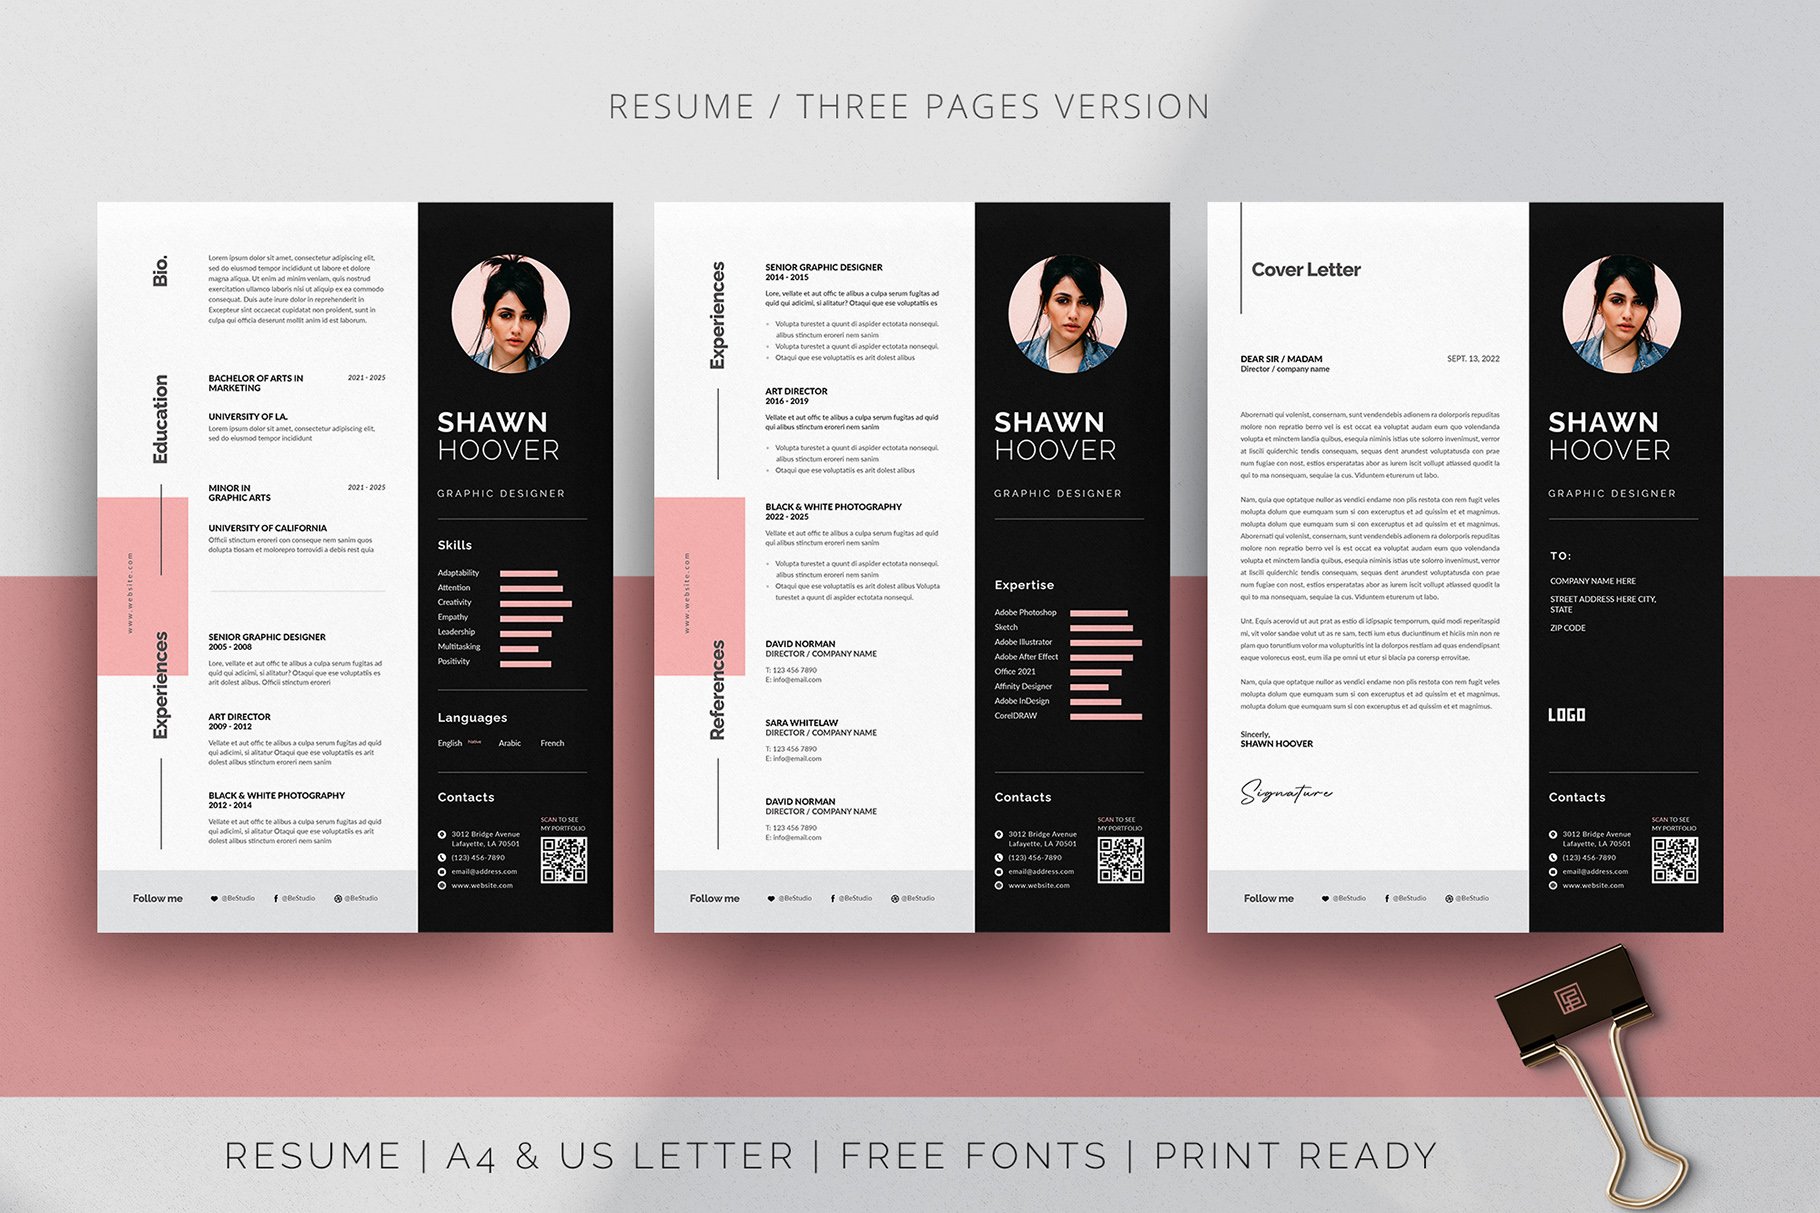 Resume Template | DOCX, PSD, INDD preview image.